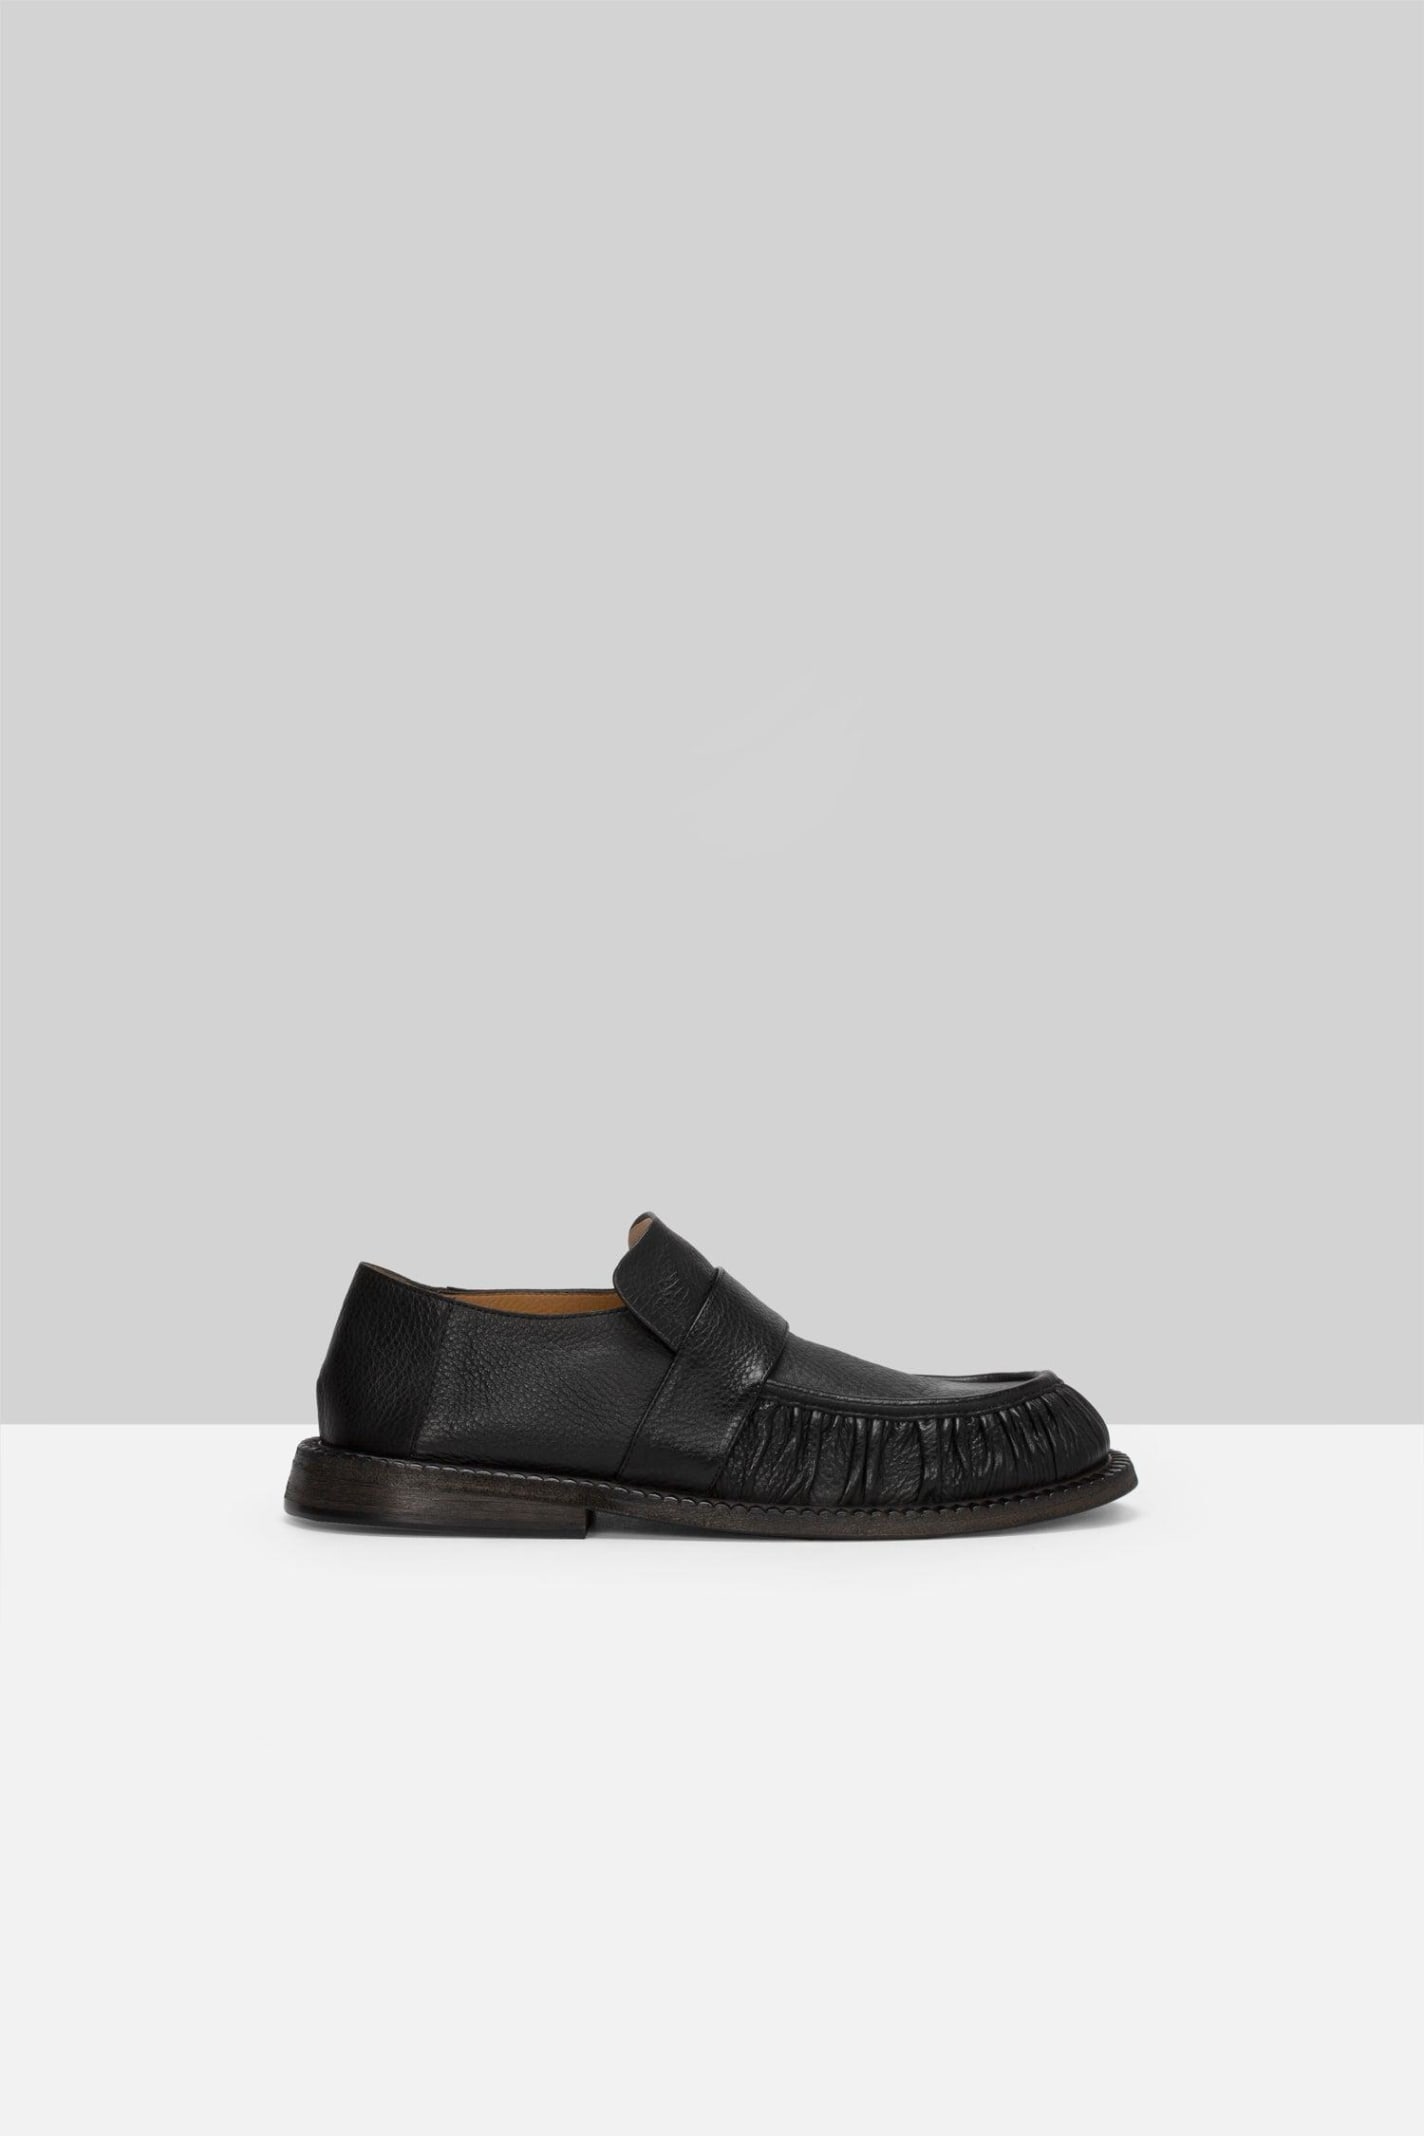 Marsell Alluce Gathered Detail Loafers